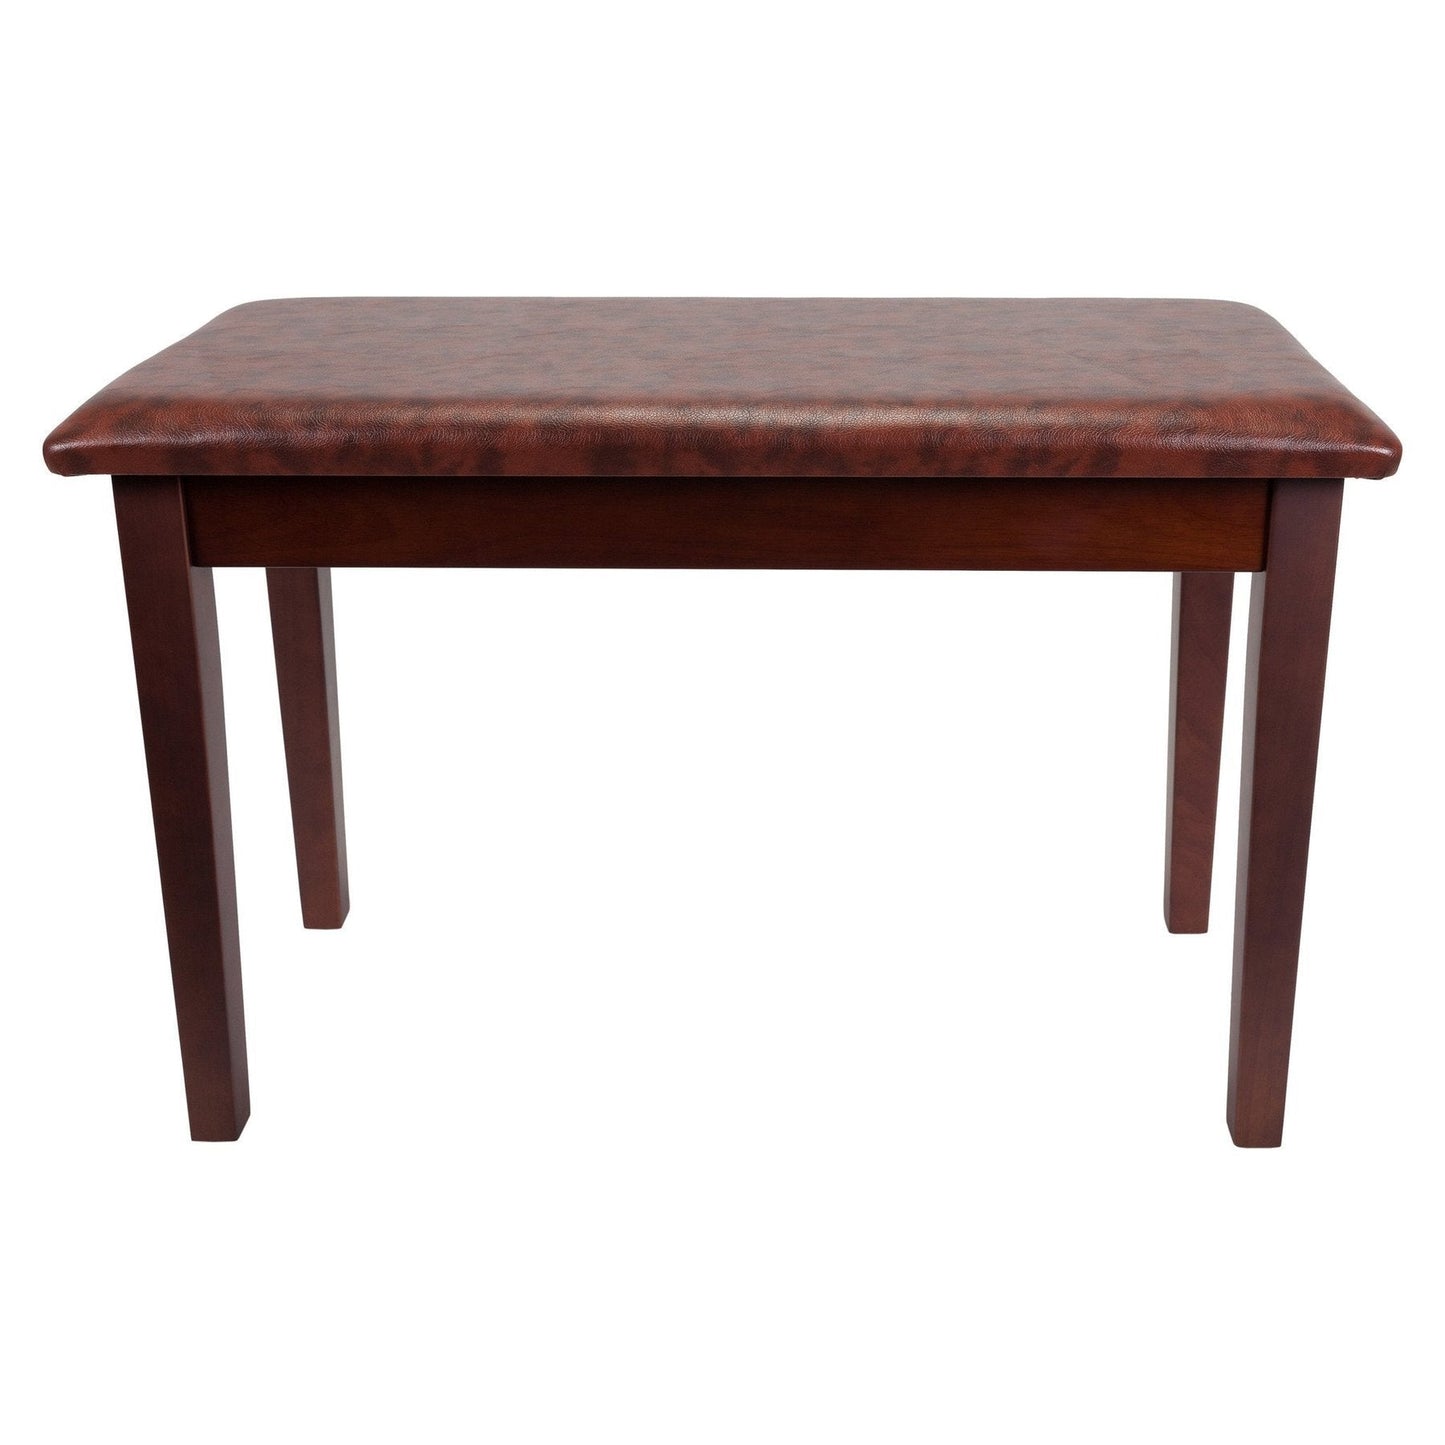 Crown Standard Duet Piano Stool with Storage Compartment (Walnut)